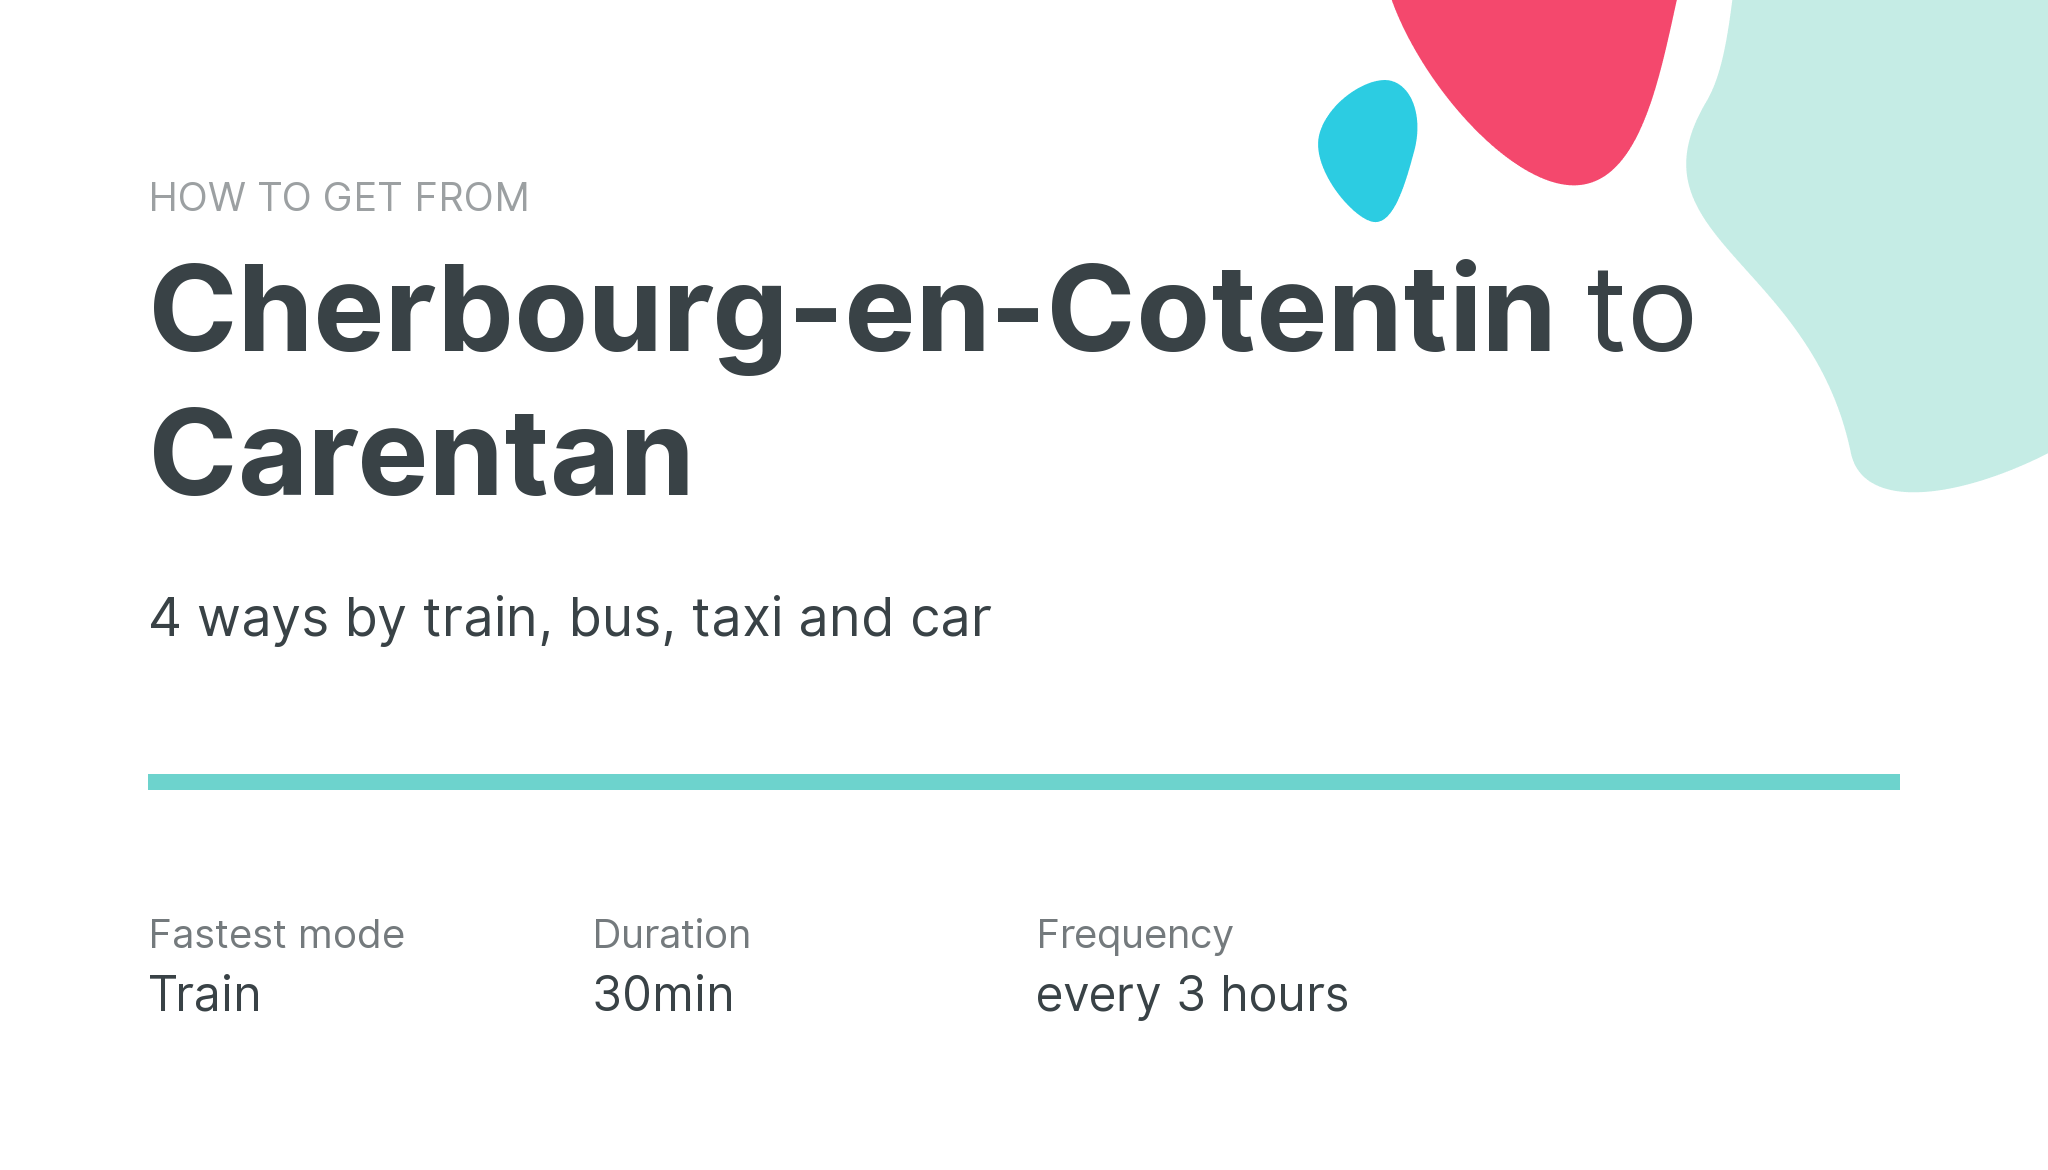 How do I get from Cherbourg-en-Cotentin to Carentan